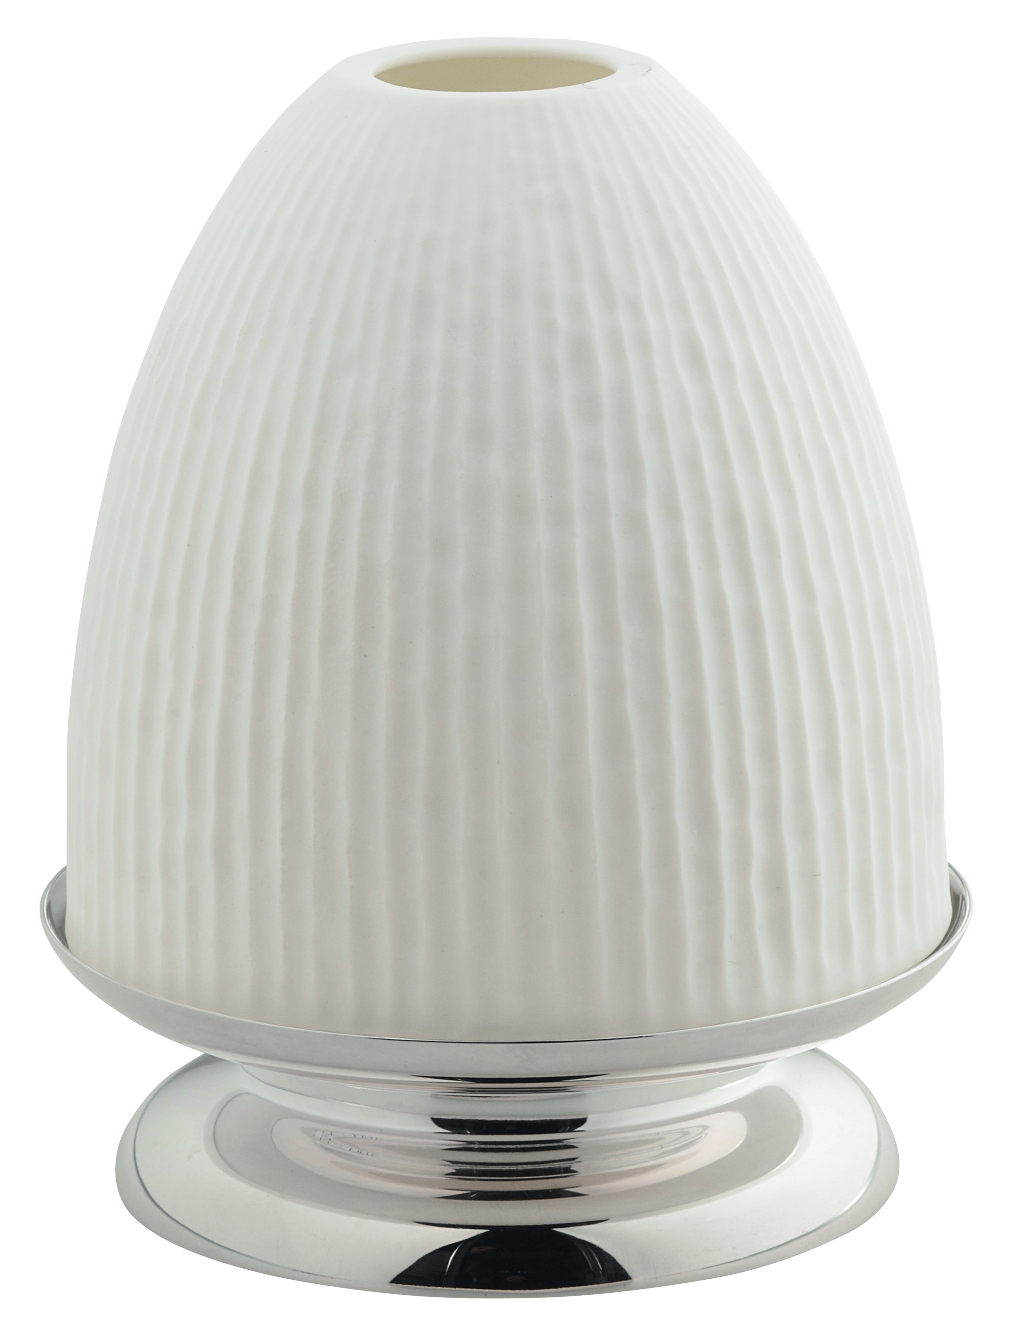 Hurricane lamp (porcelain lampshade) in silver plated - Ercuis